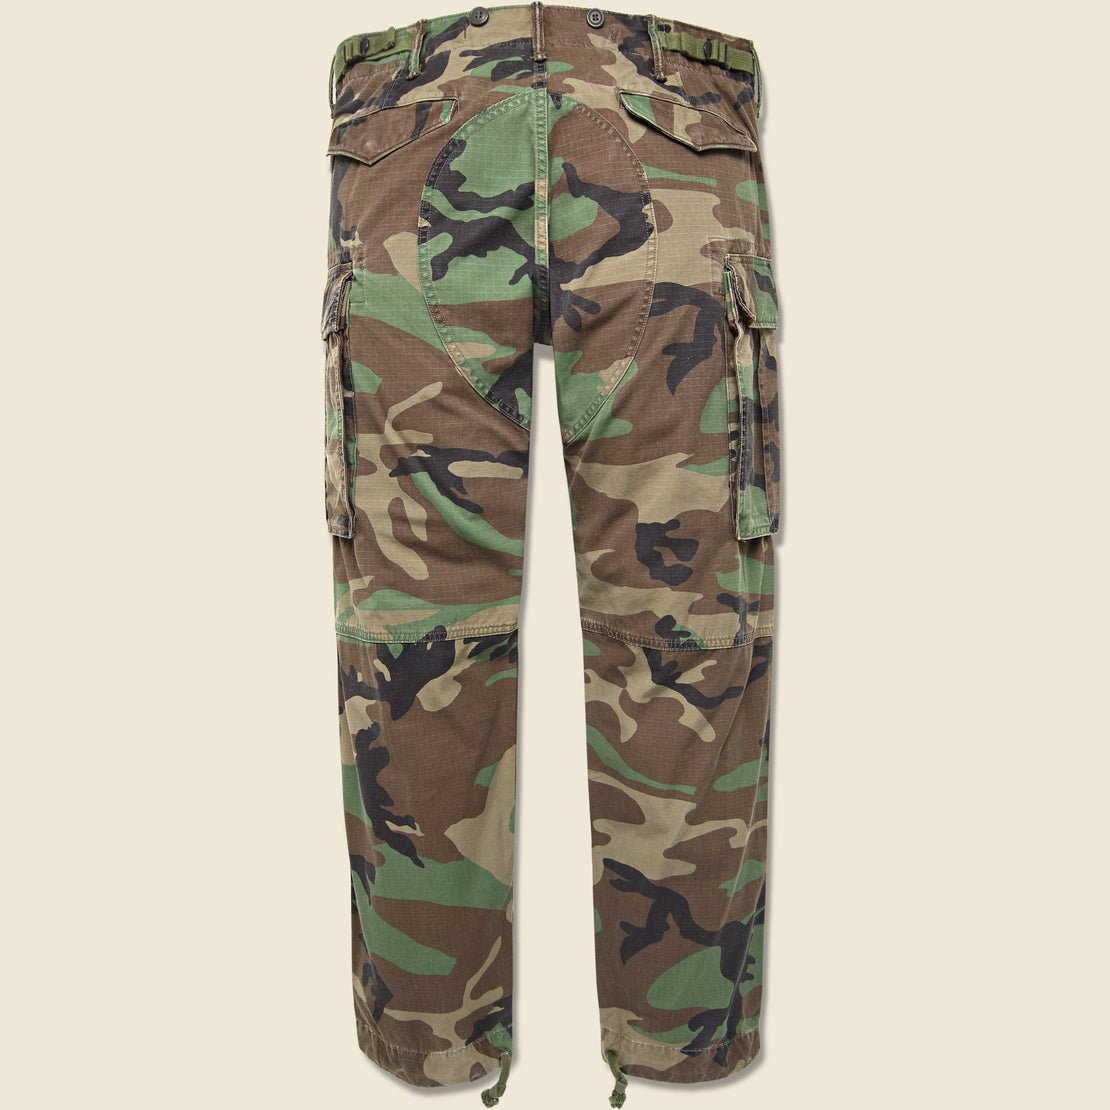 Camo Ripstop Cargo Pant - Woodland Camo - RRL - STAG Provisions - Pants - Twill